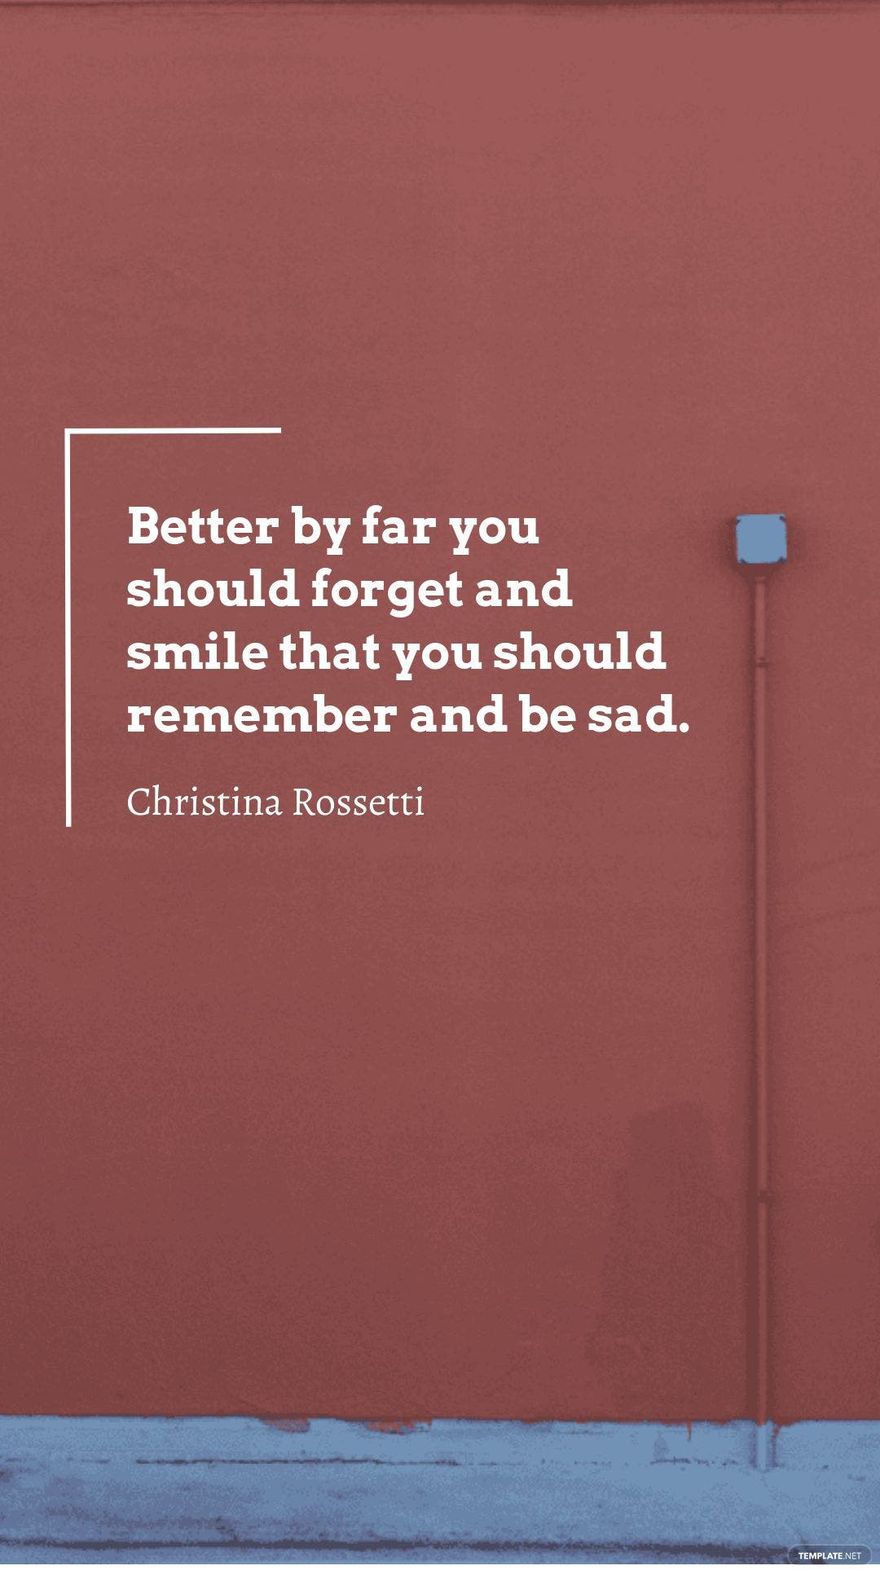 Christina Rossetti - Better by far you should forget and smile that you should remember and be sad.